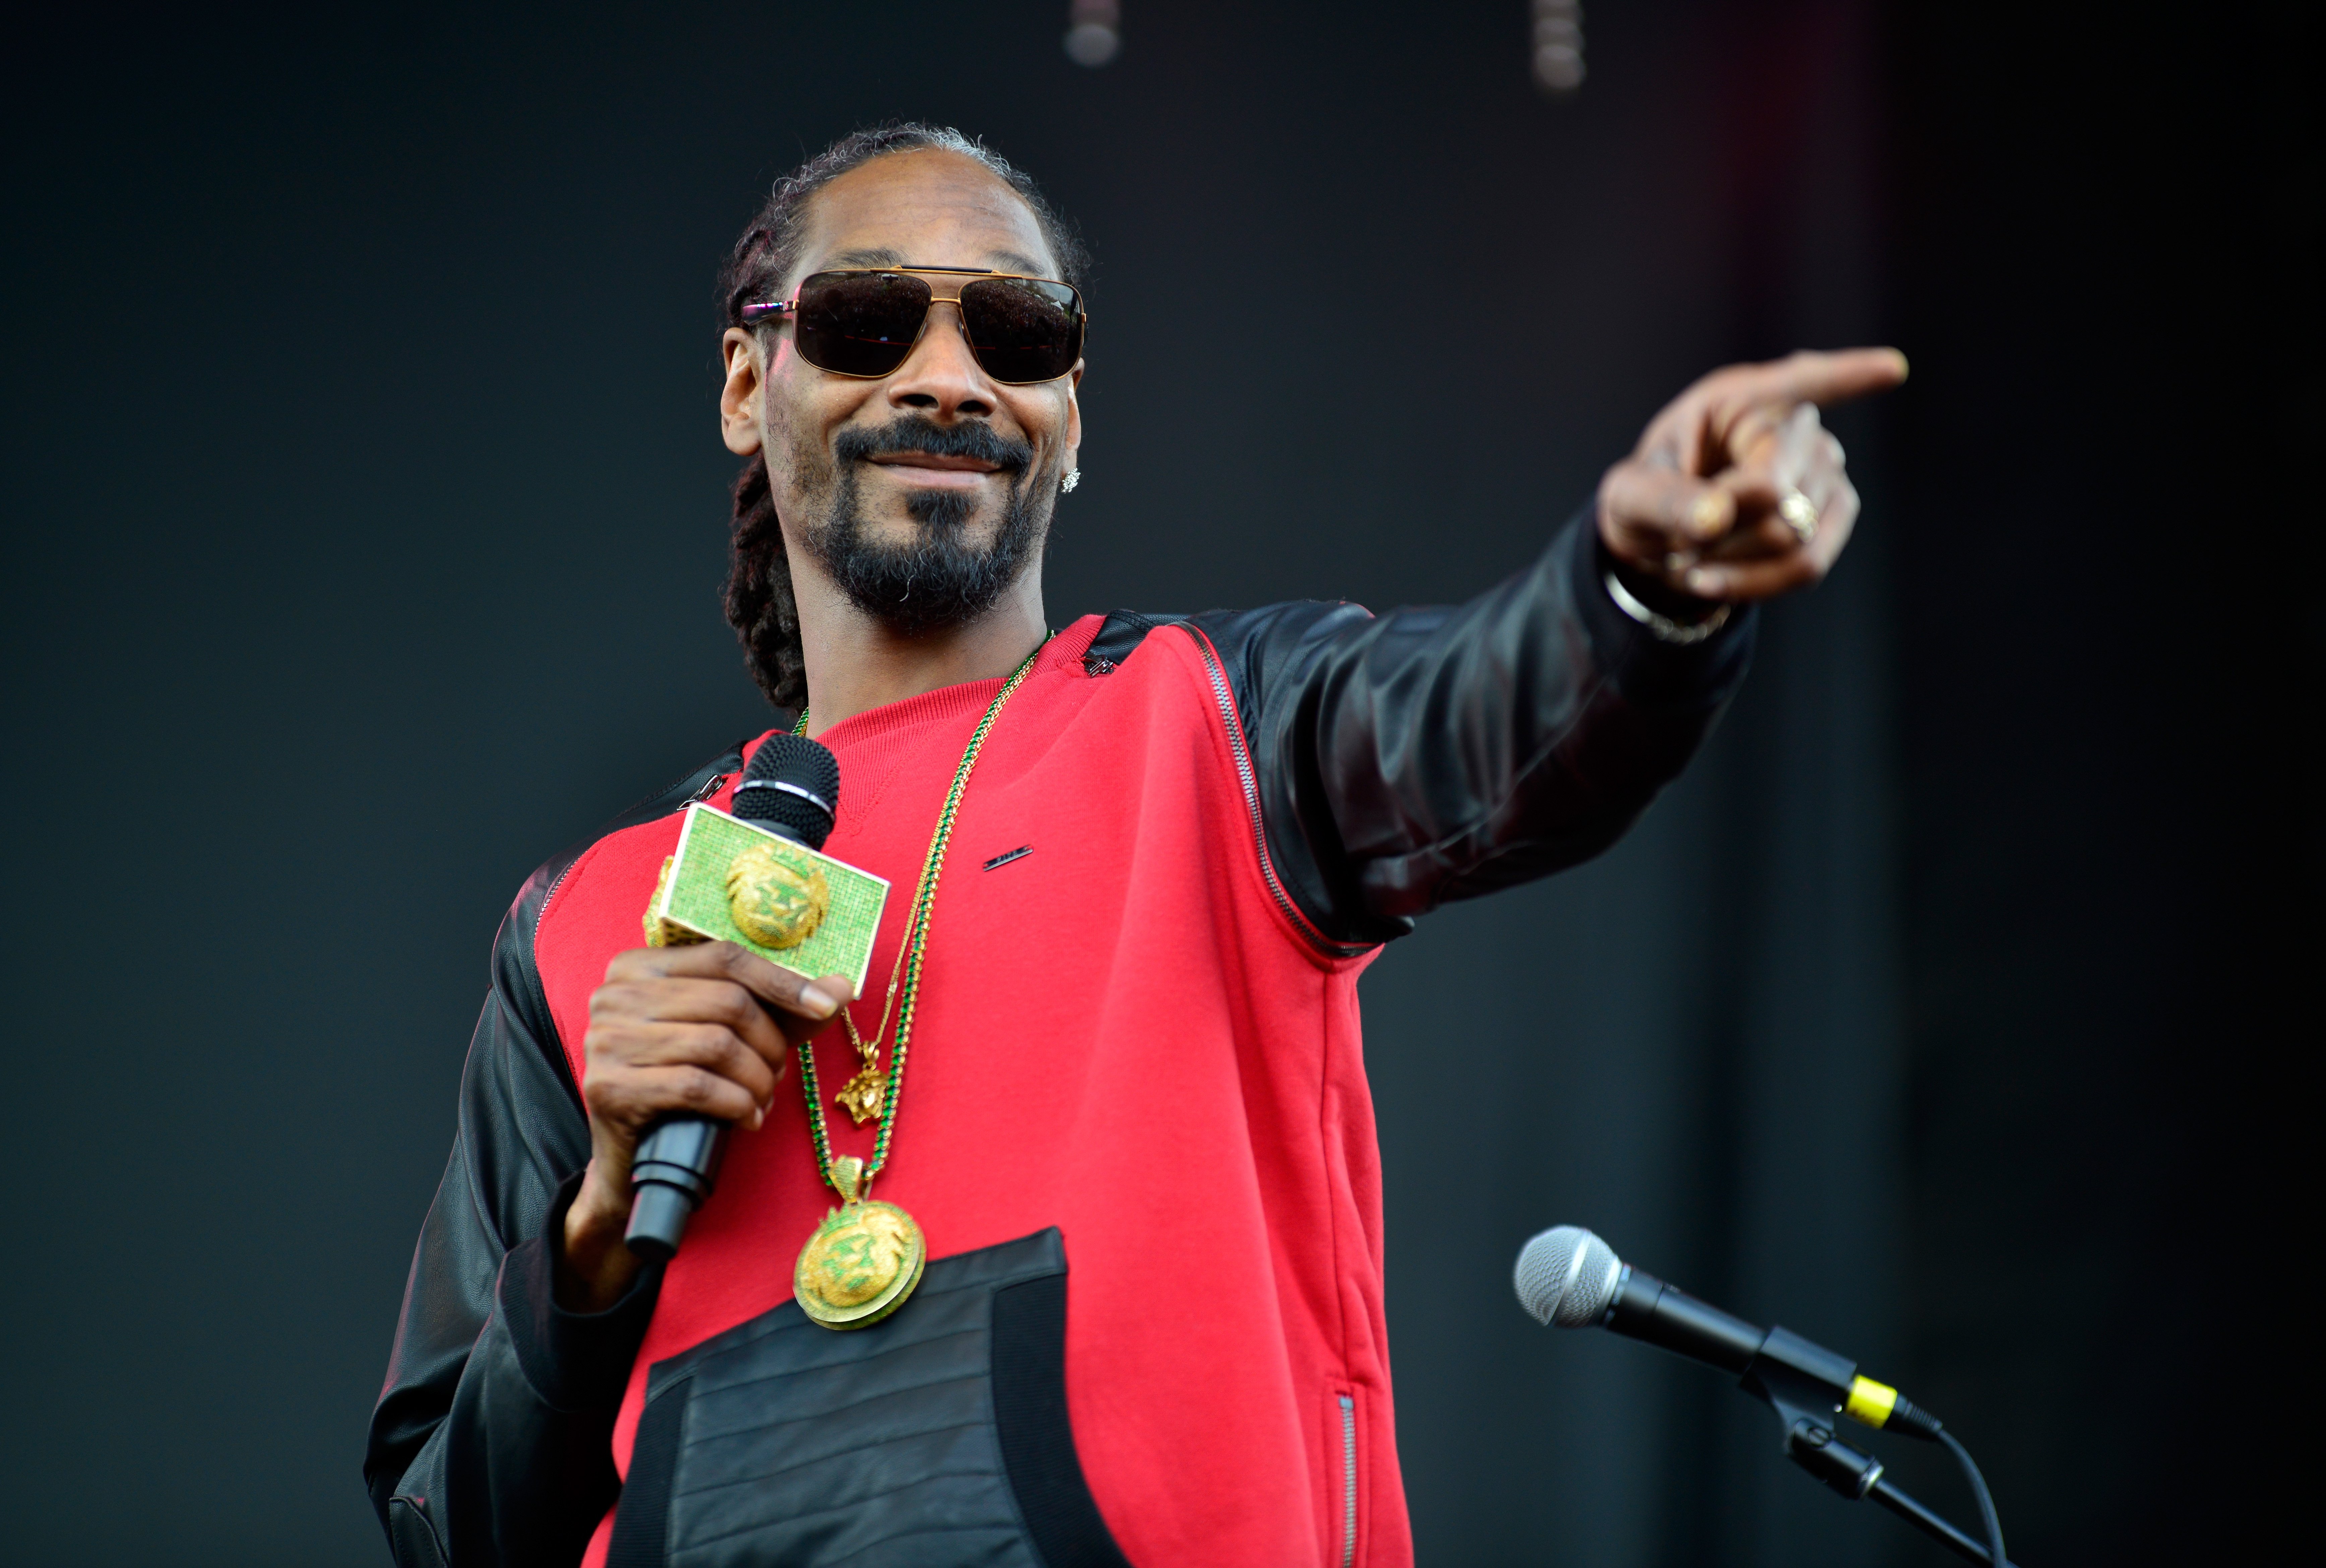 Snoop Dogg at the SXSW Music, Film + Interactive Festival on March 15, 2014 in Texas | Photo: Getty Images